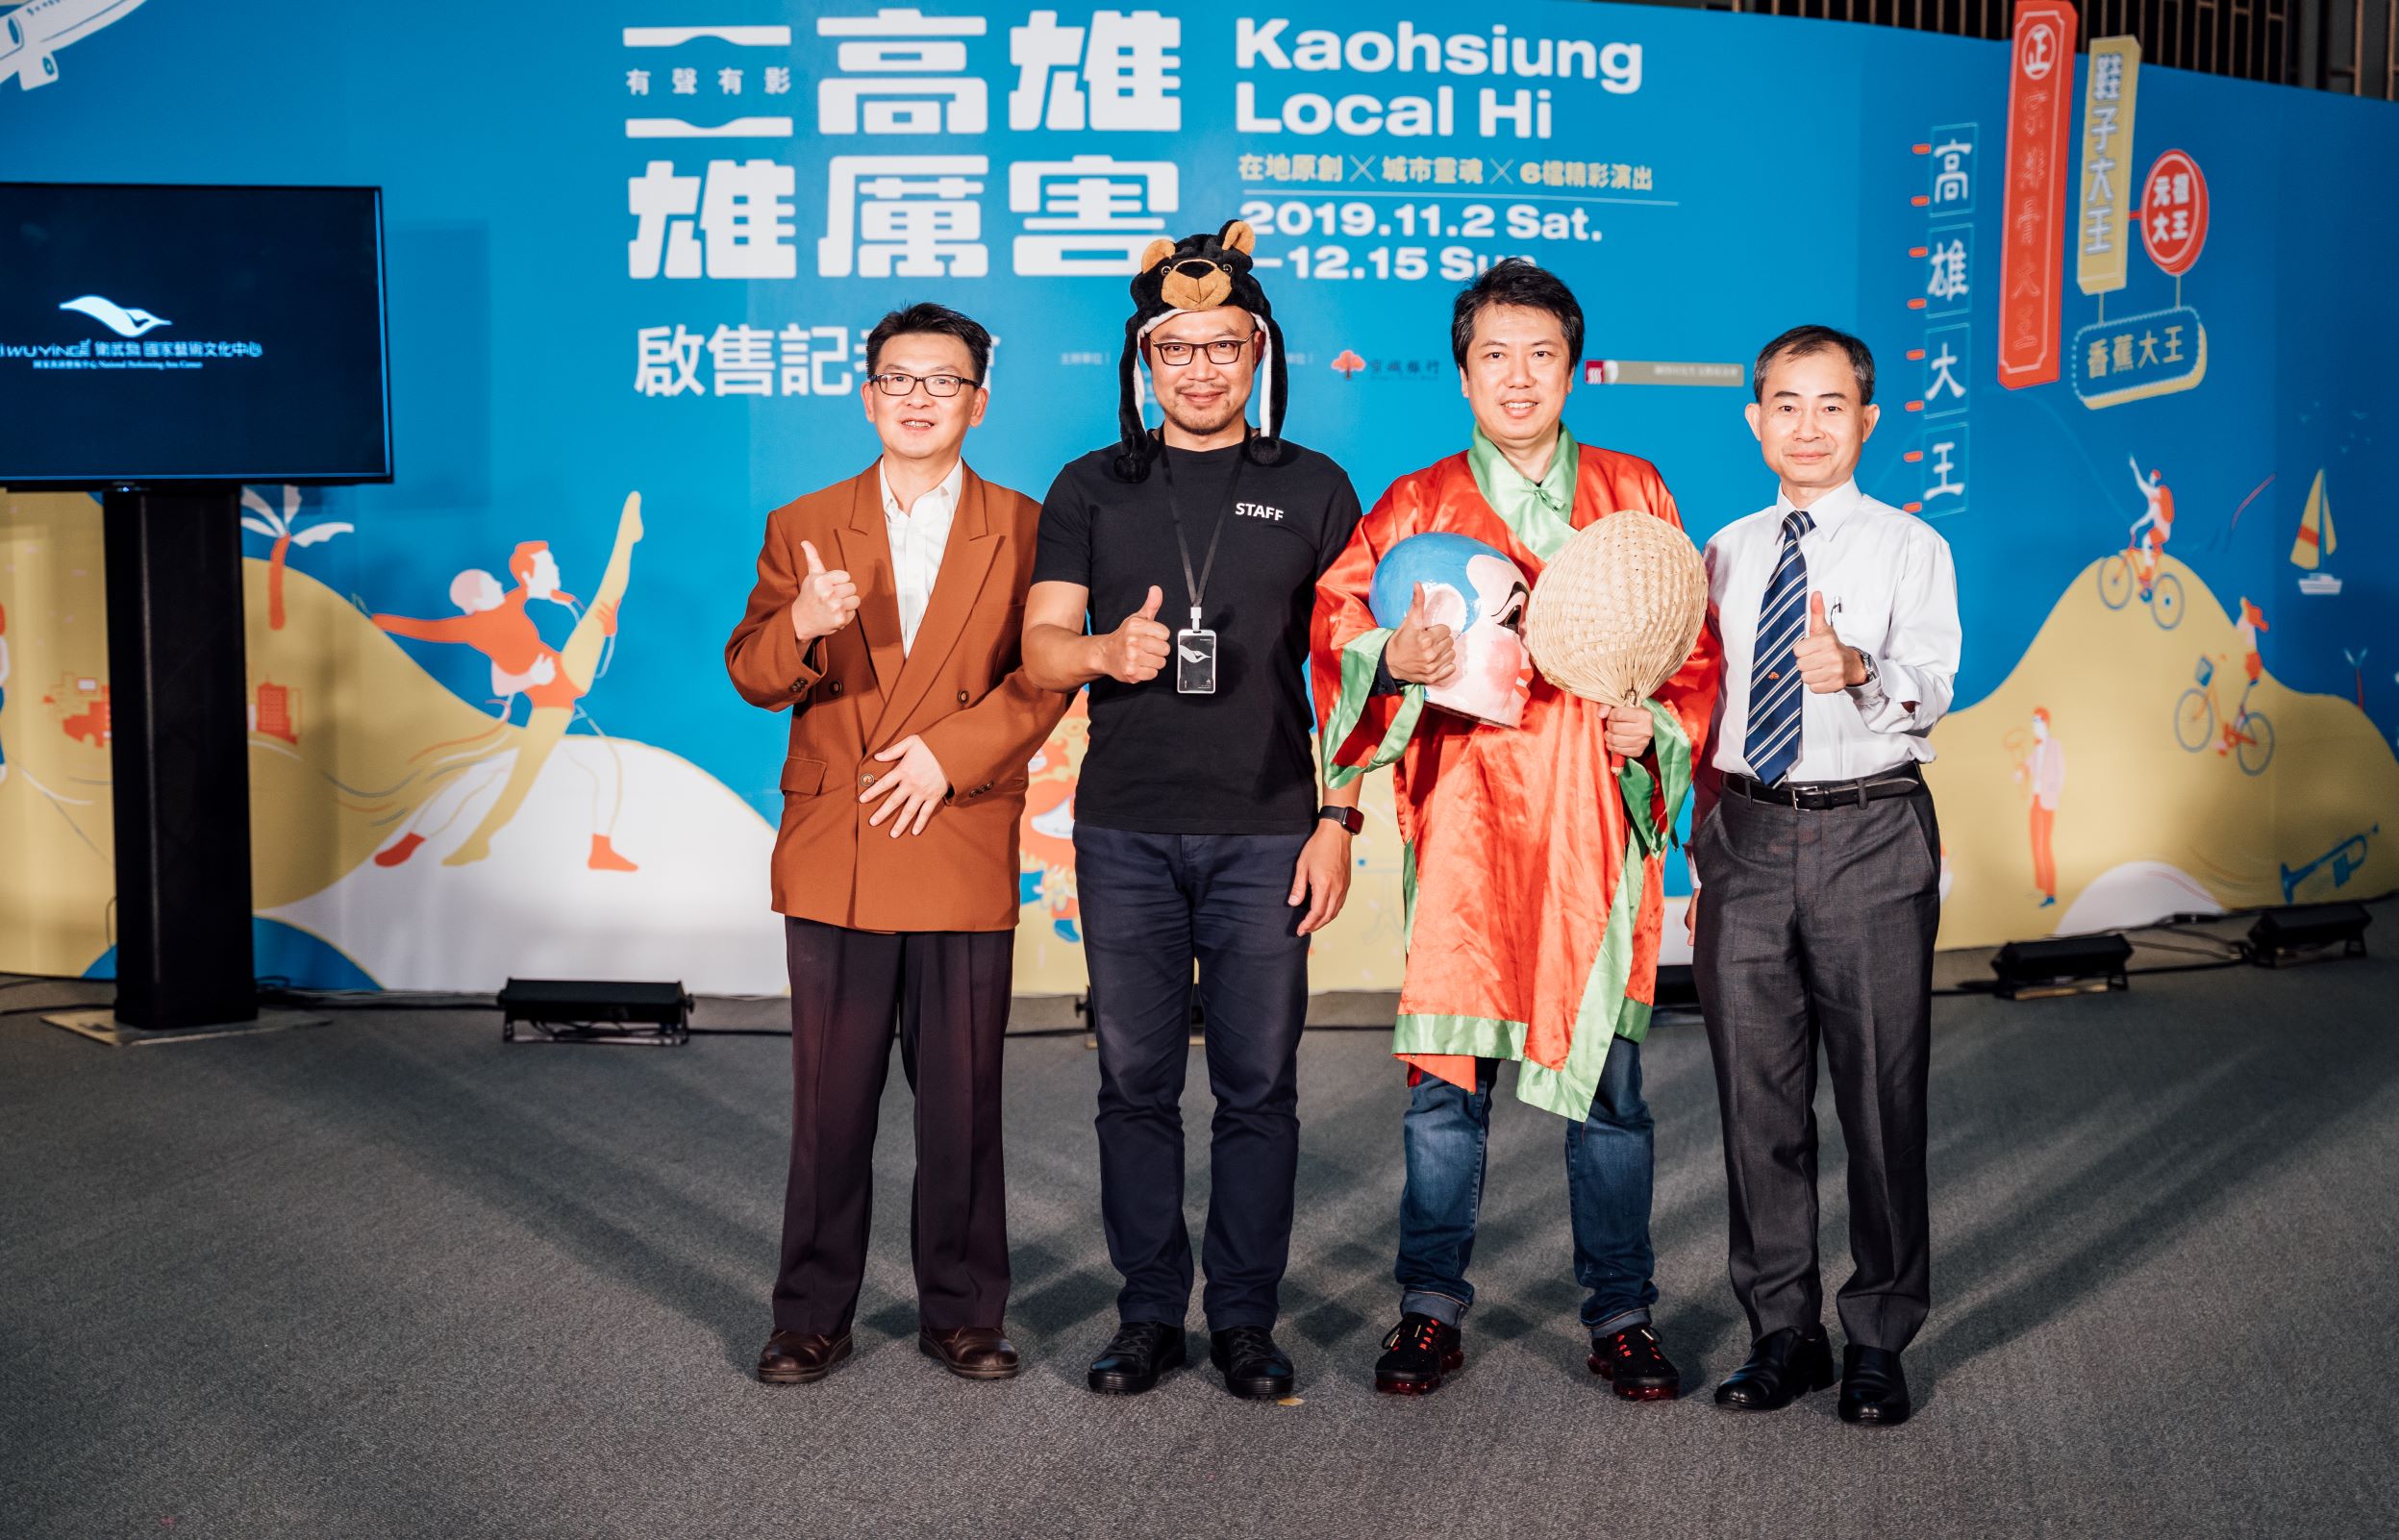 Phoho:Chien-Ke YANG from King’s Town Bank, the main supporter of Kaohsiung Local Hi added, “Local Hi’s need local support, and although King’s Town Bank is not the largest in size, but certainly anticipate to be the strongest supporting role with Kaohsiung Local Hi and citizens of the city.”